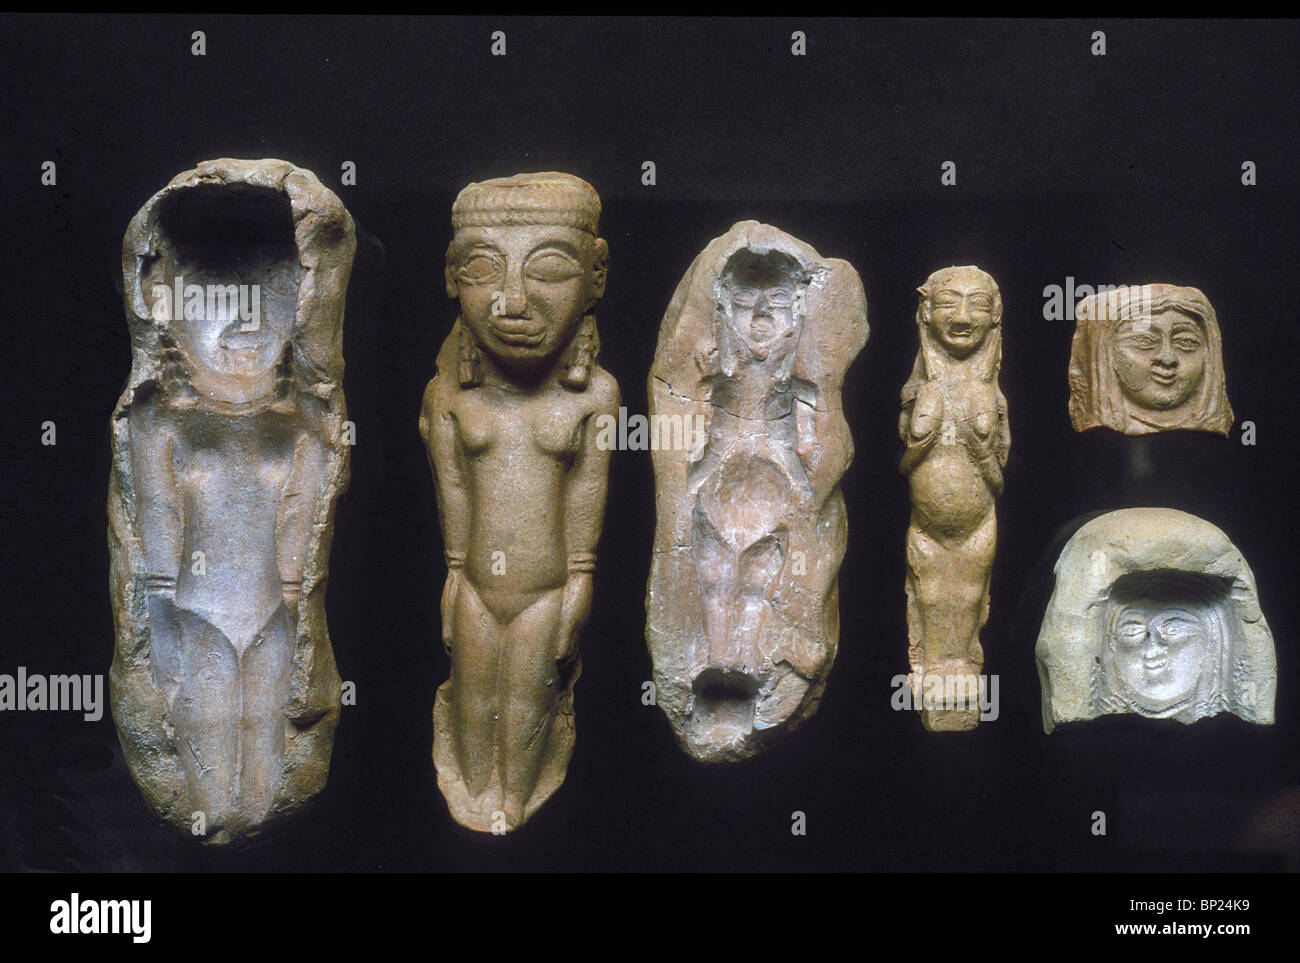 CLAY FIGURINE OF A FERTILITY GODDESS & THE MOLD FROM WHICH THE FIGURINE WAS CAST. TEL BATASHI (THE HILL-COUNTRY) C. 8-7TH. C. Stock Photo